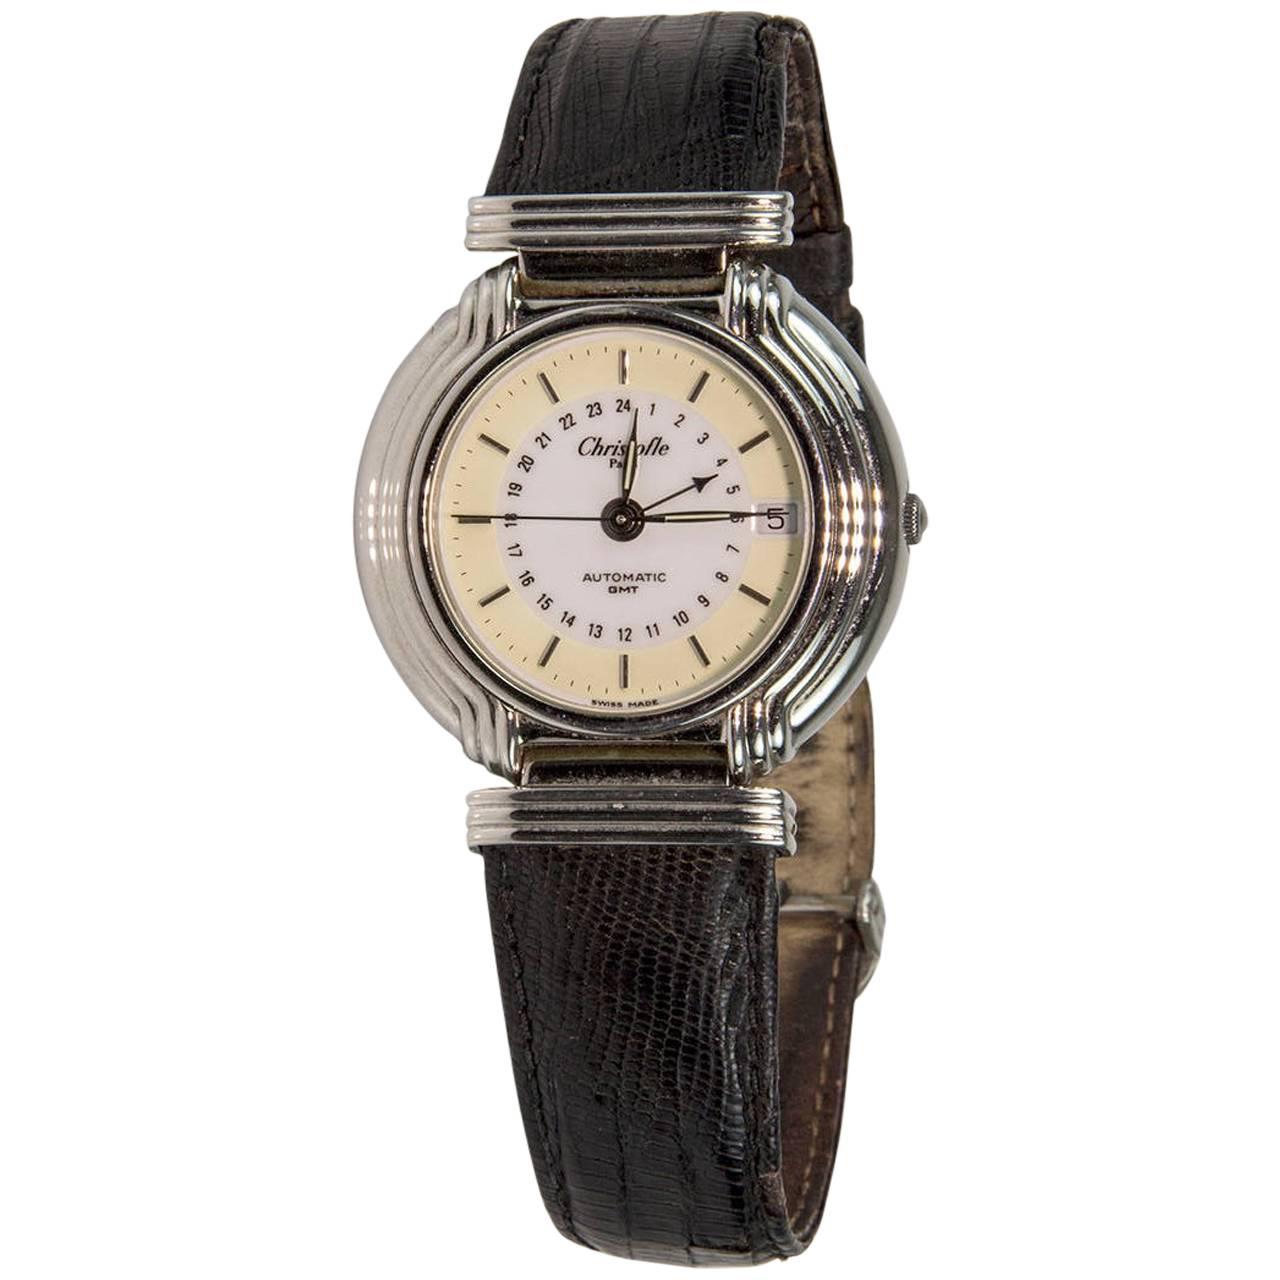 Christofle Paris Stainless Steel Automatic Wristwatch 